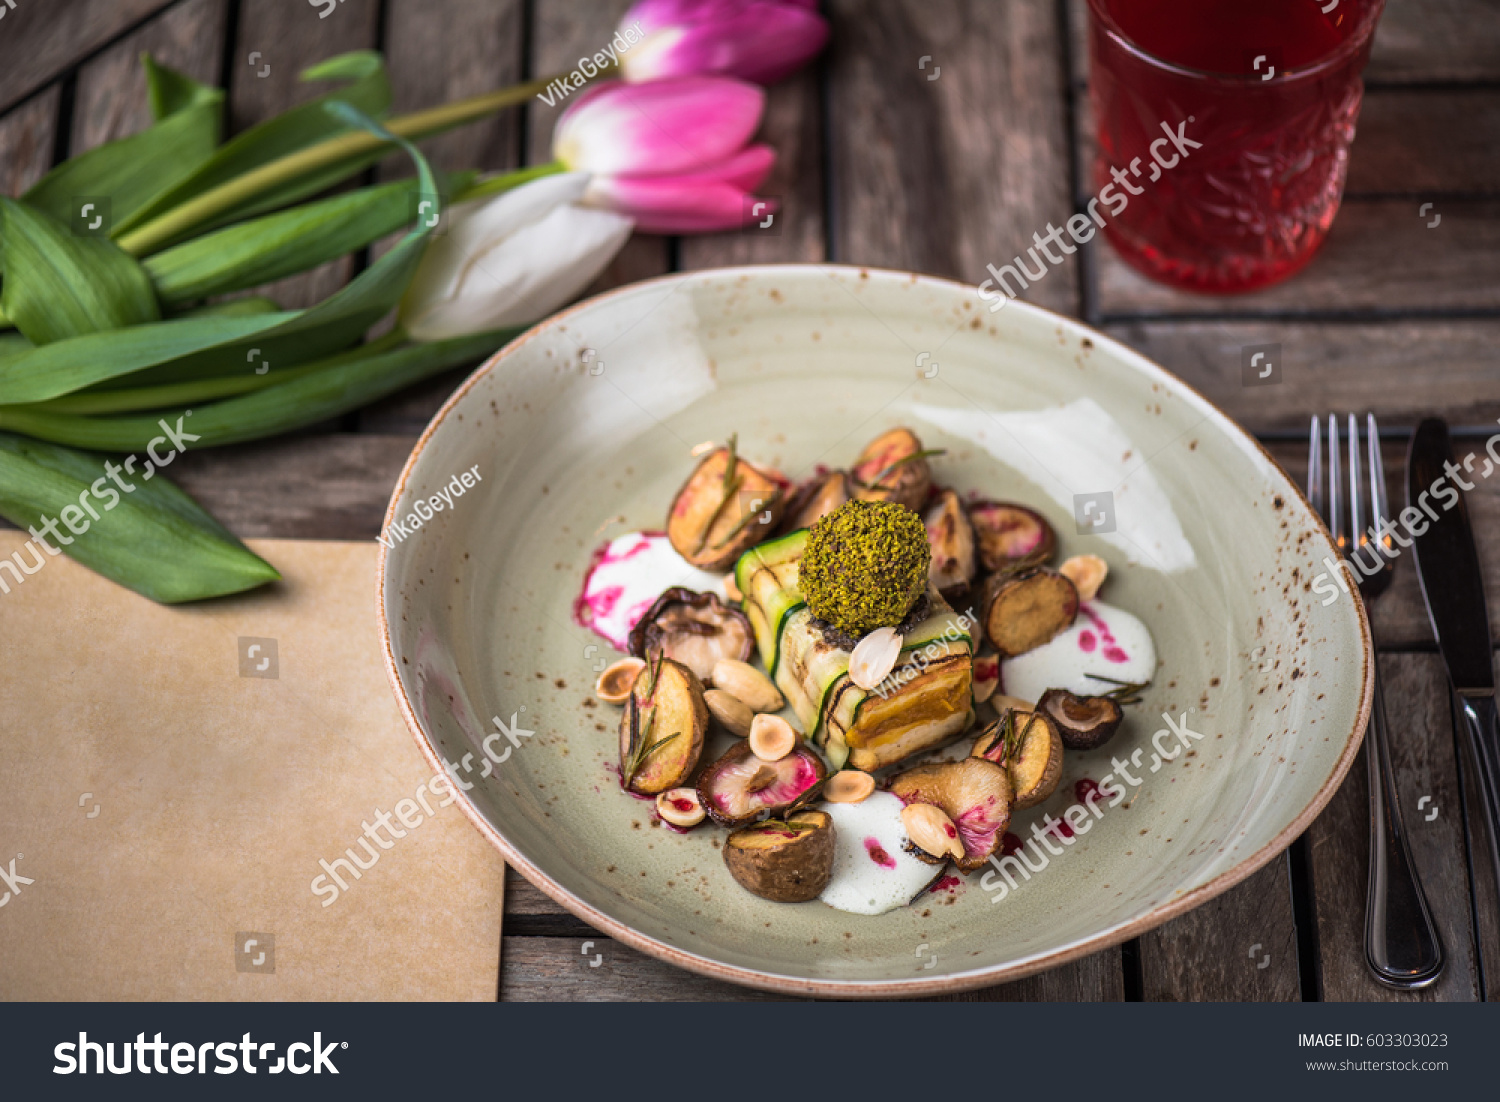 Appetizer of cheese and vegetables, flowers and drink on a wooden table close-up. Healthy food. Vegetarian food. #603303023